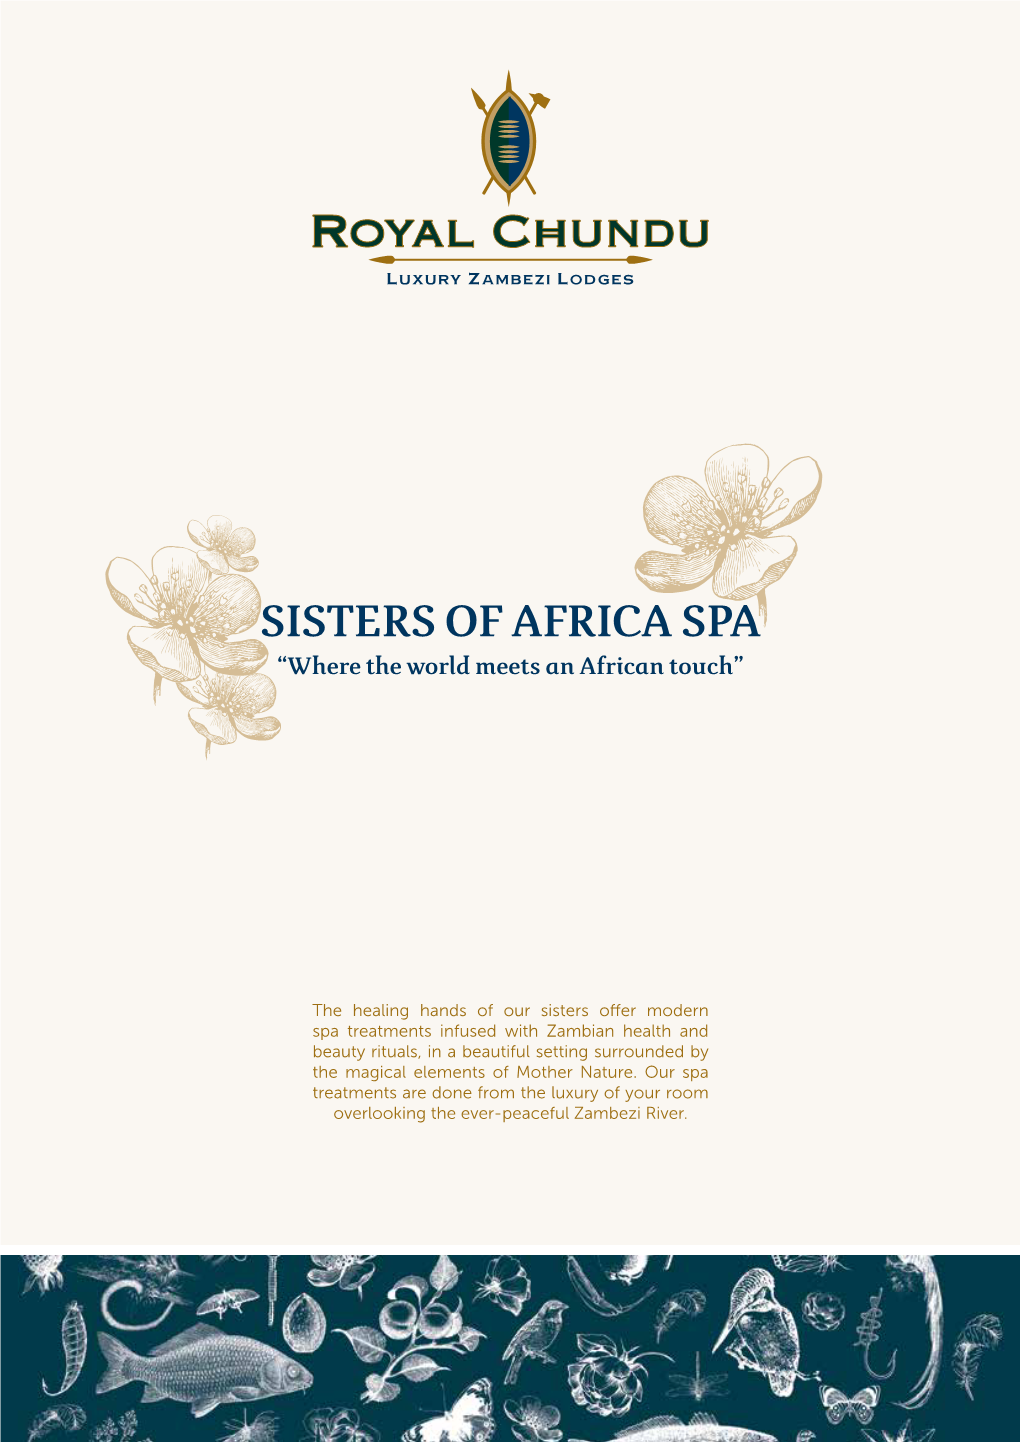 SISTERS of AFRICA SPA “Where the World Meets an African Touch”